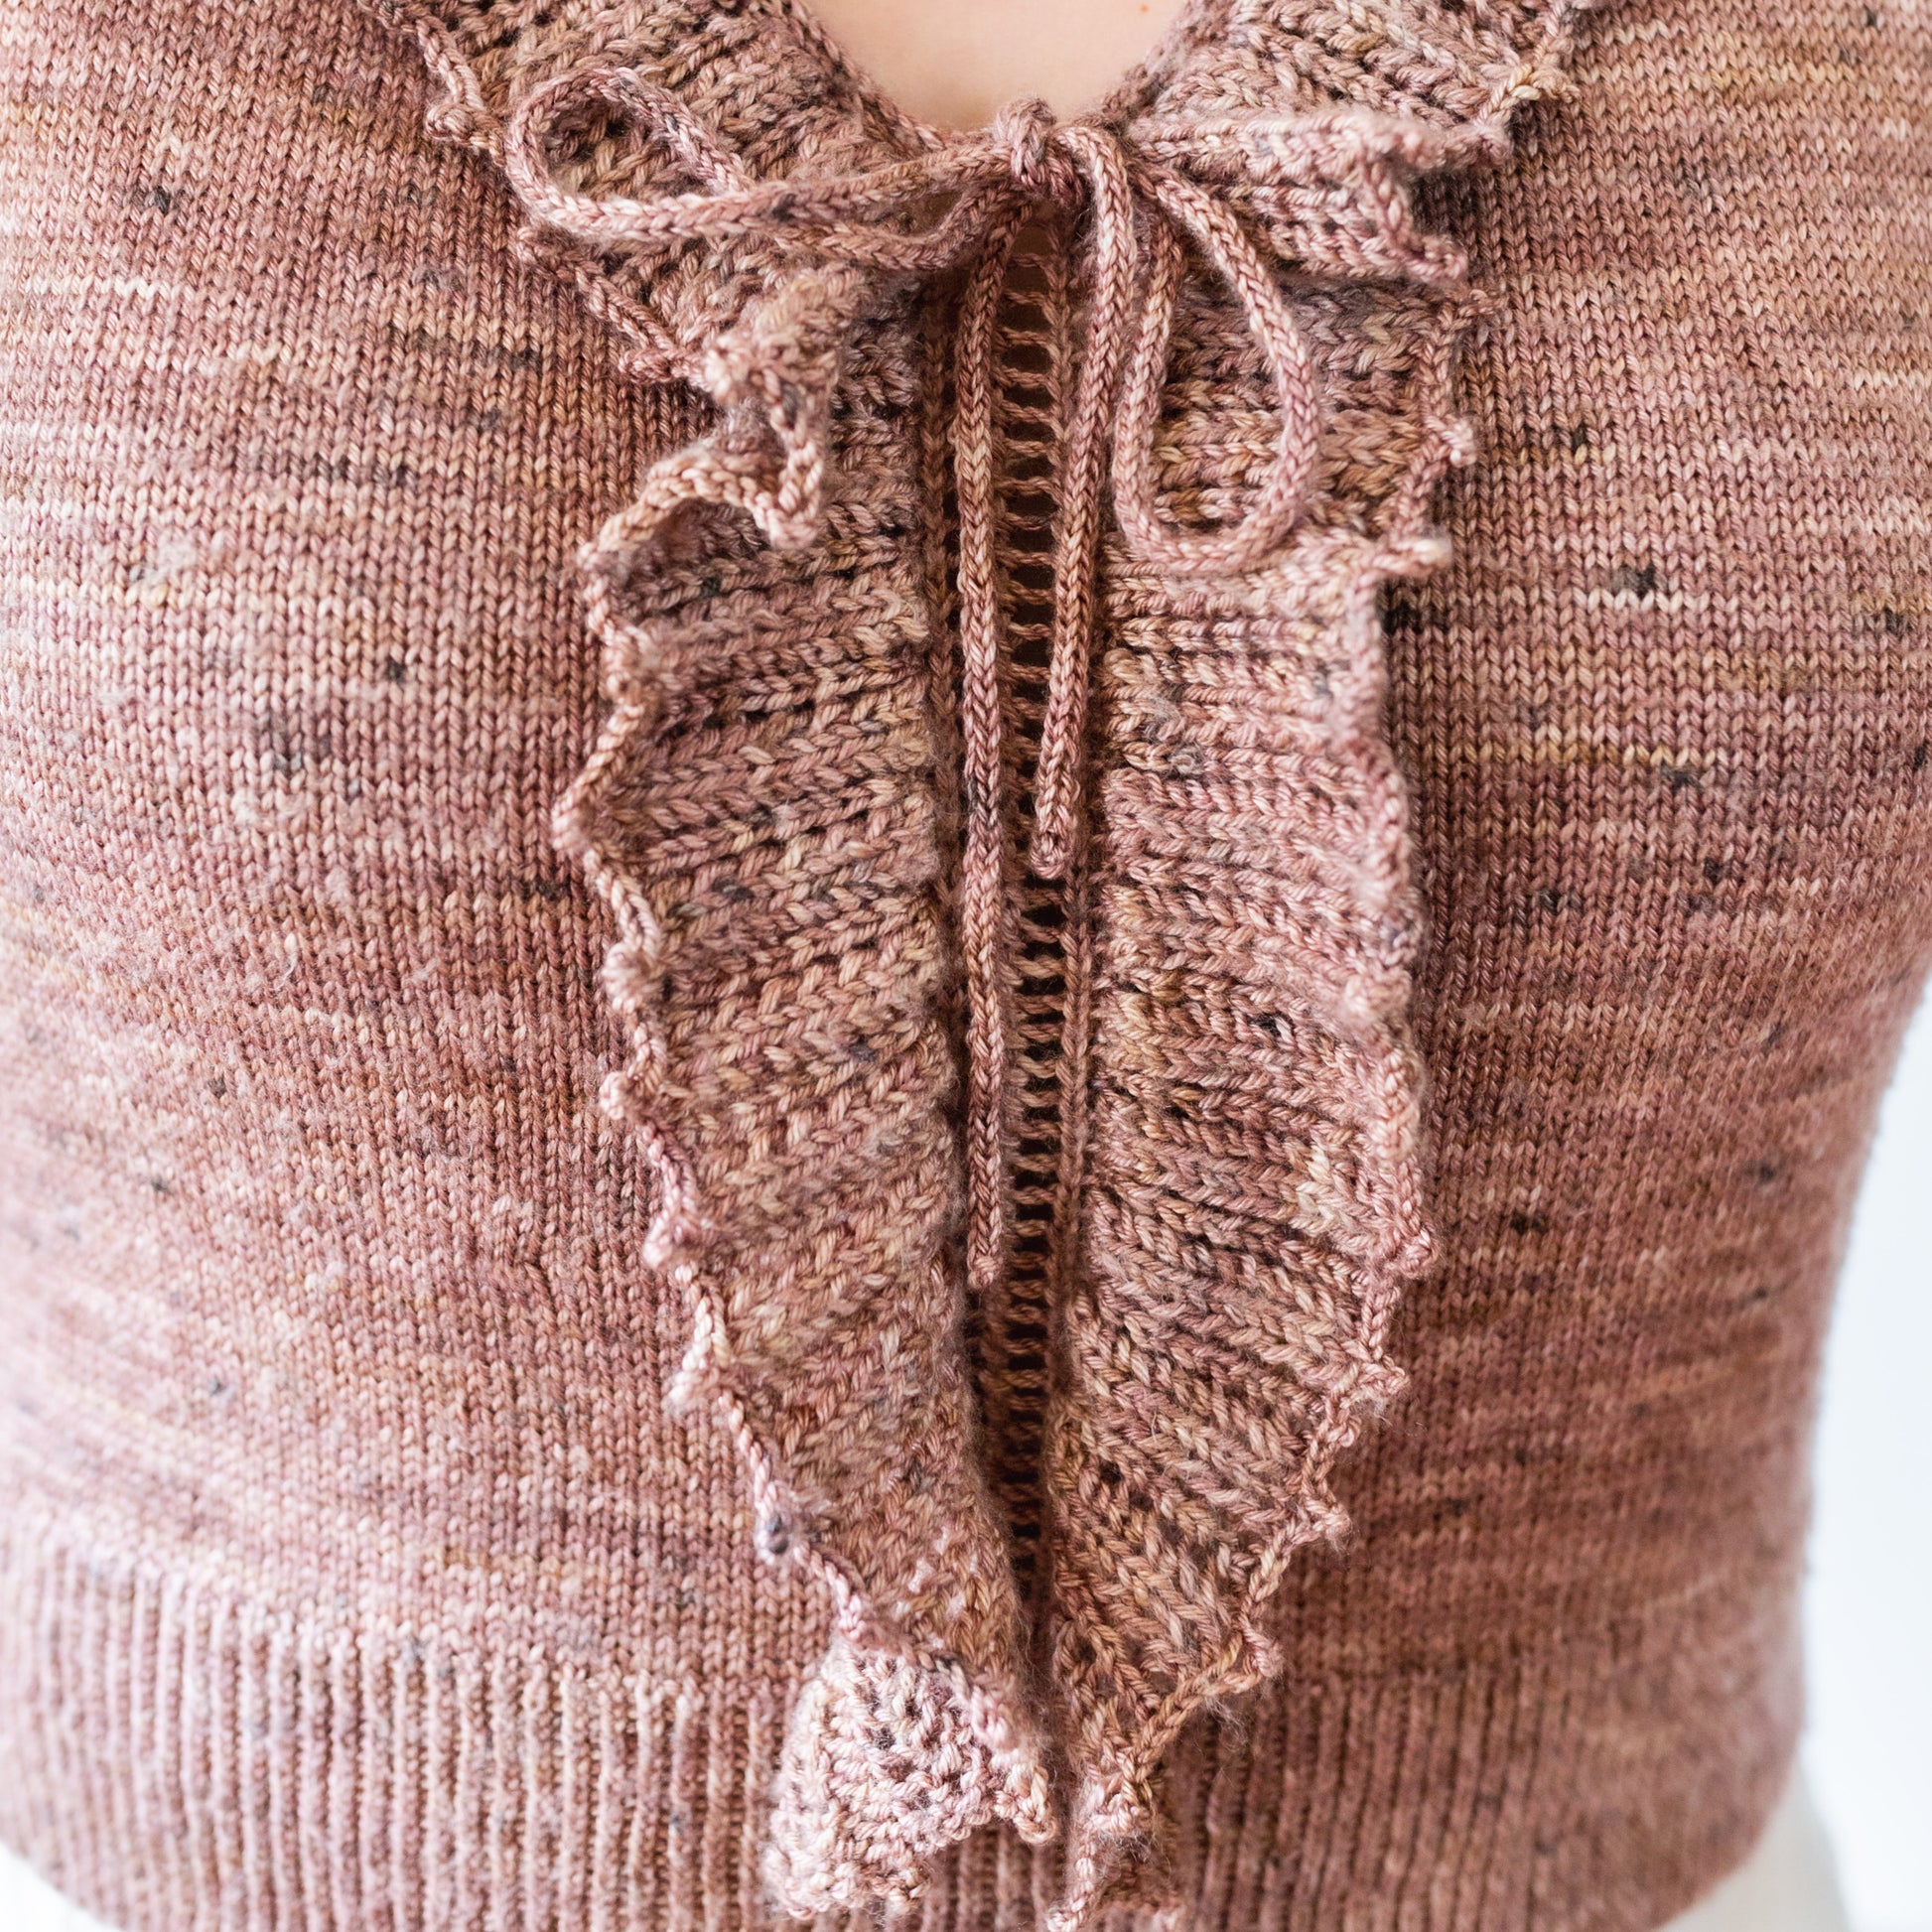 Seen up close, Jen wears a pink knit tank top. The lace details on the ruffle and bow tie can be seen in detail.